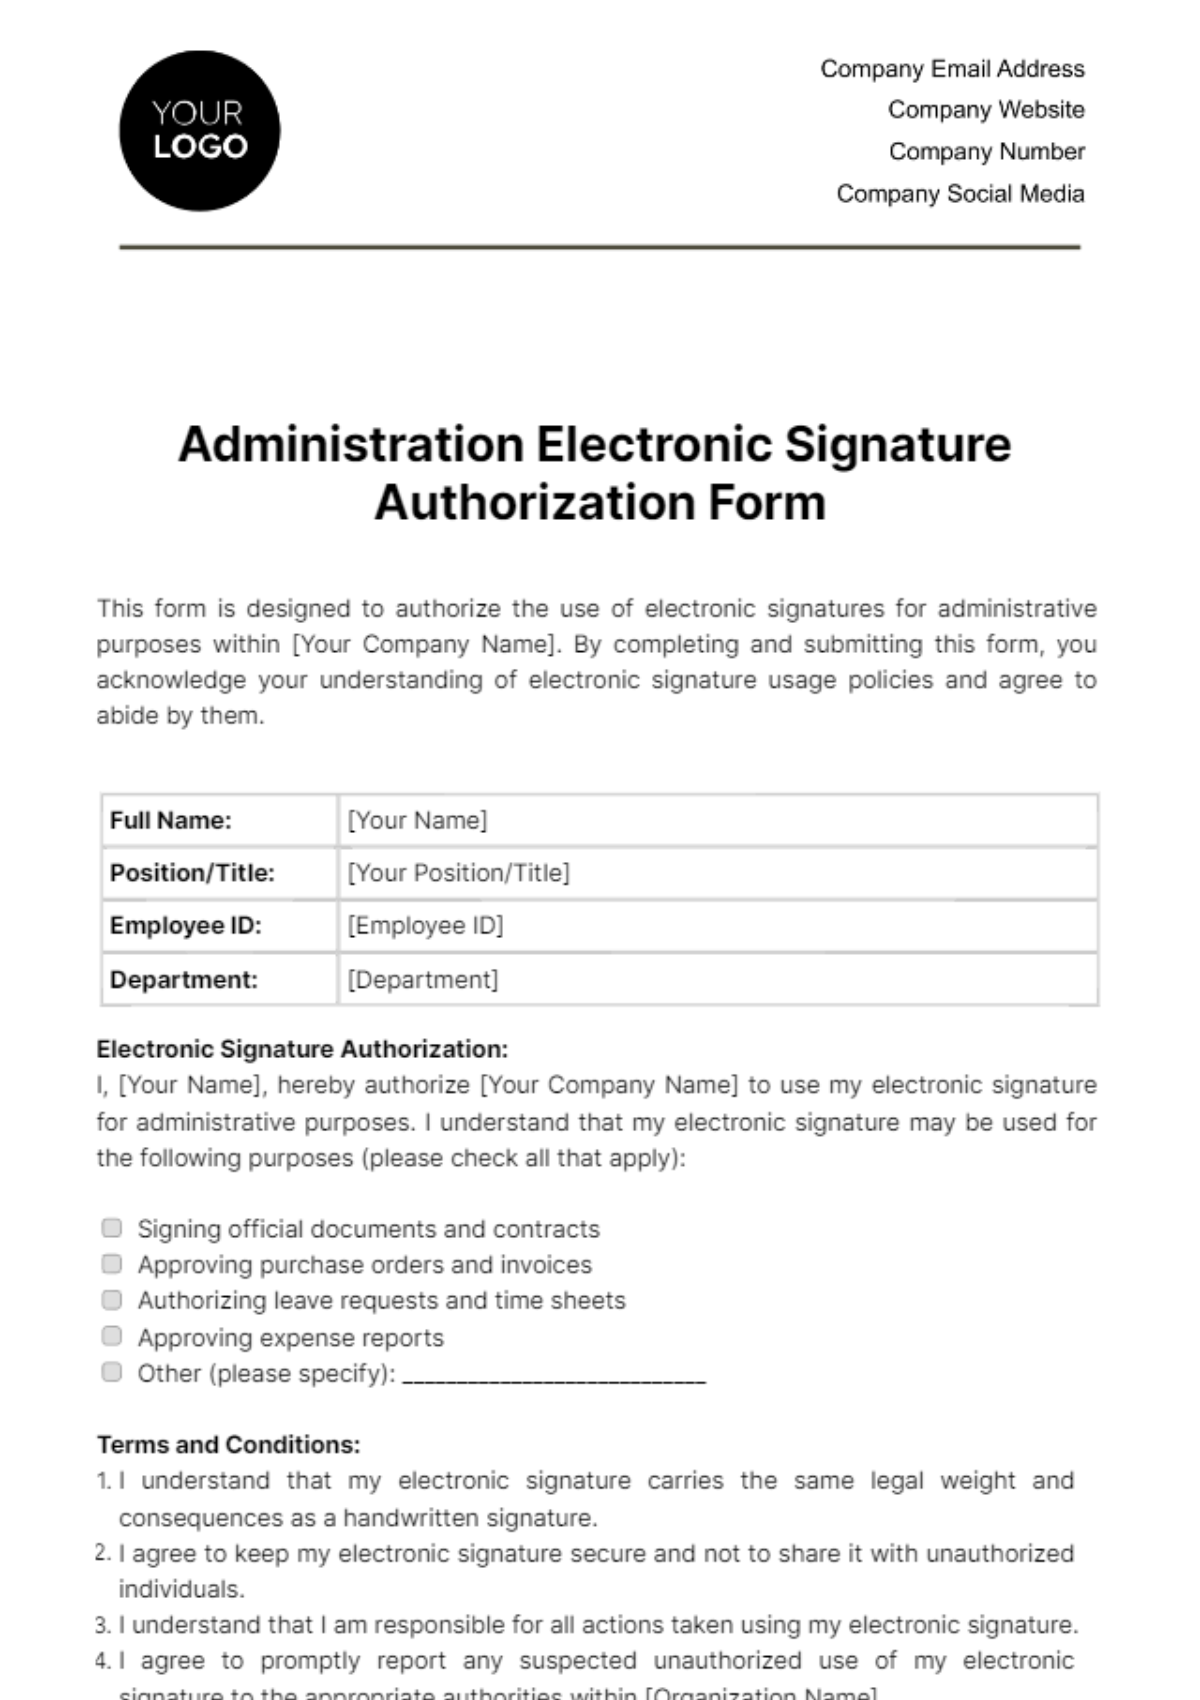 Free Administration Electronic Signature Authorization Form Template